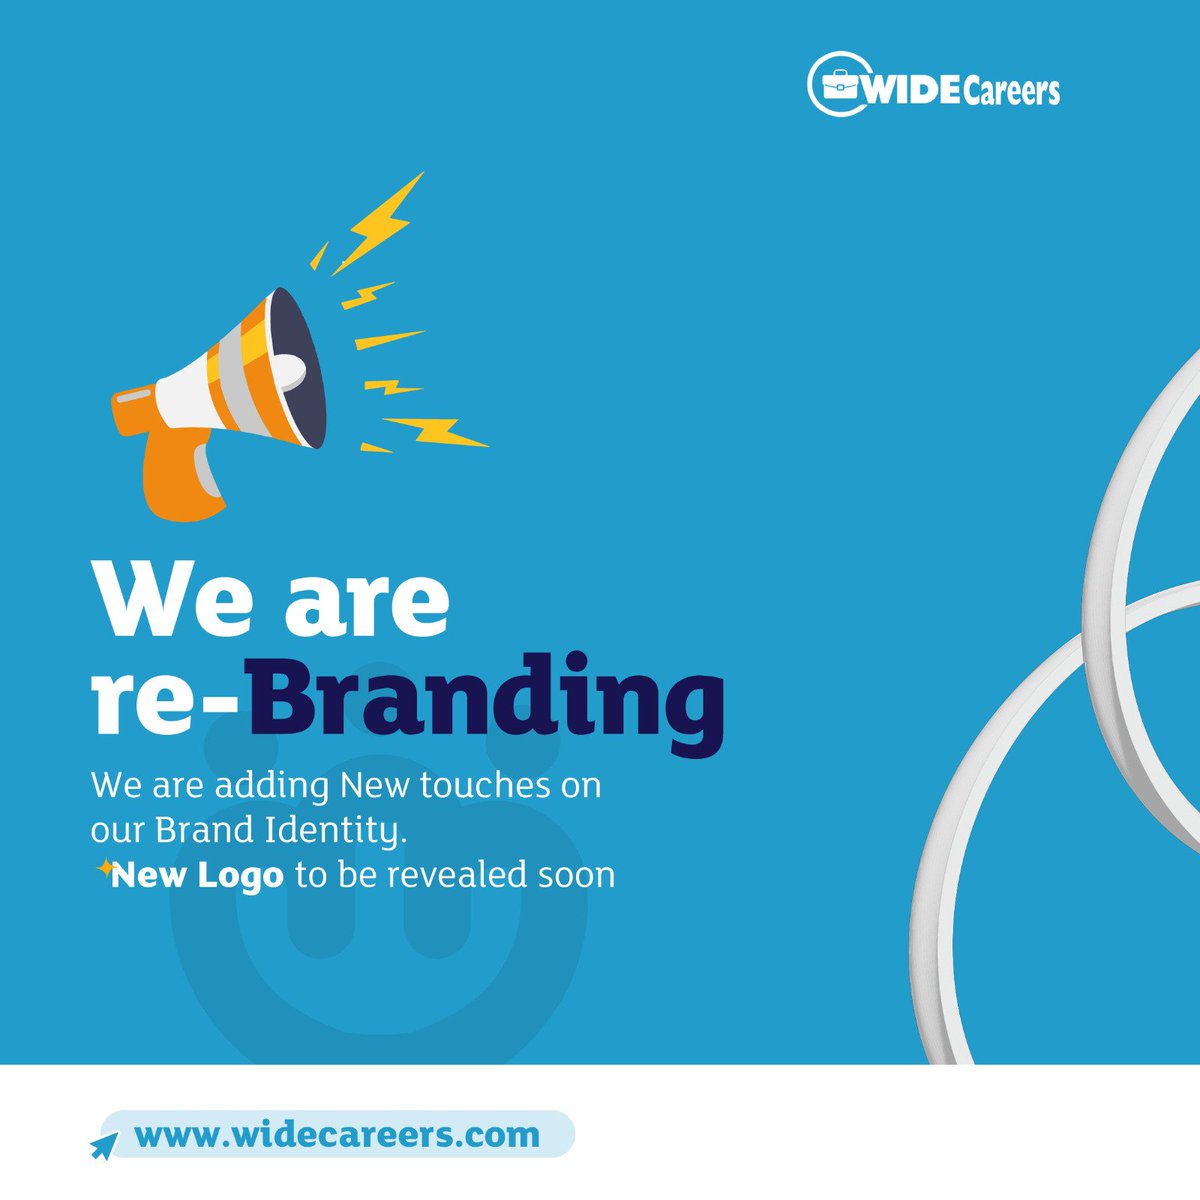 We are coming soon in new Branding!

New Shape, New Strategy with Quality Service Delivery #Widecareers #hrsolution  #careergrowth